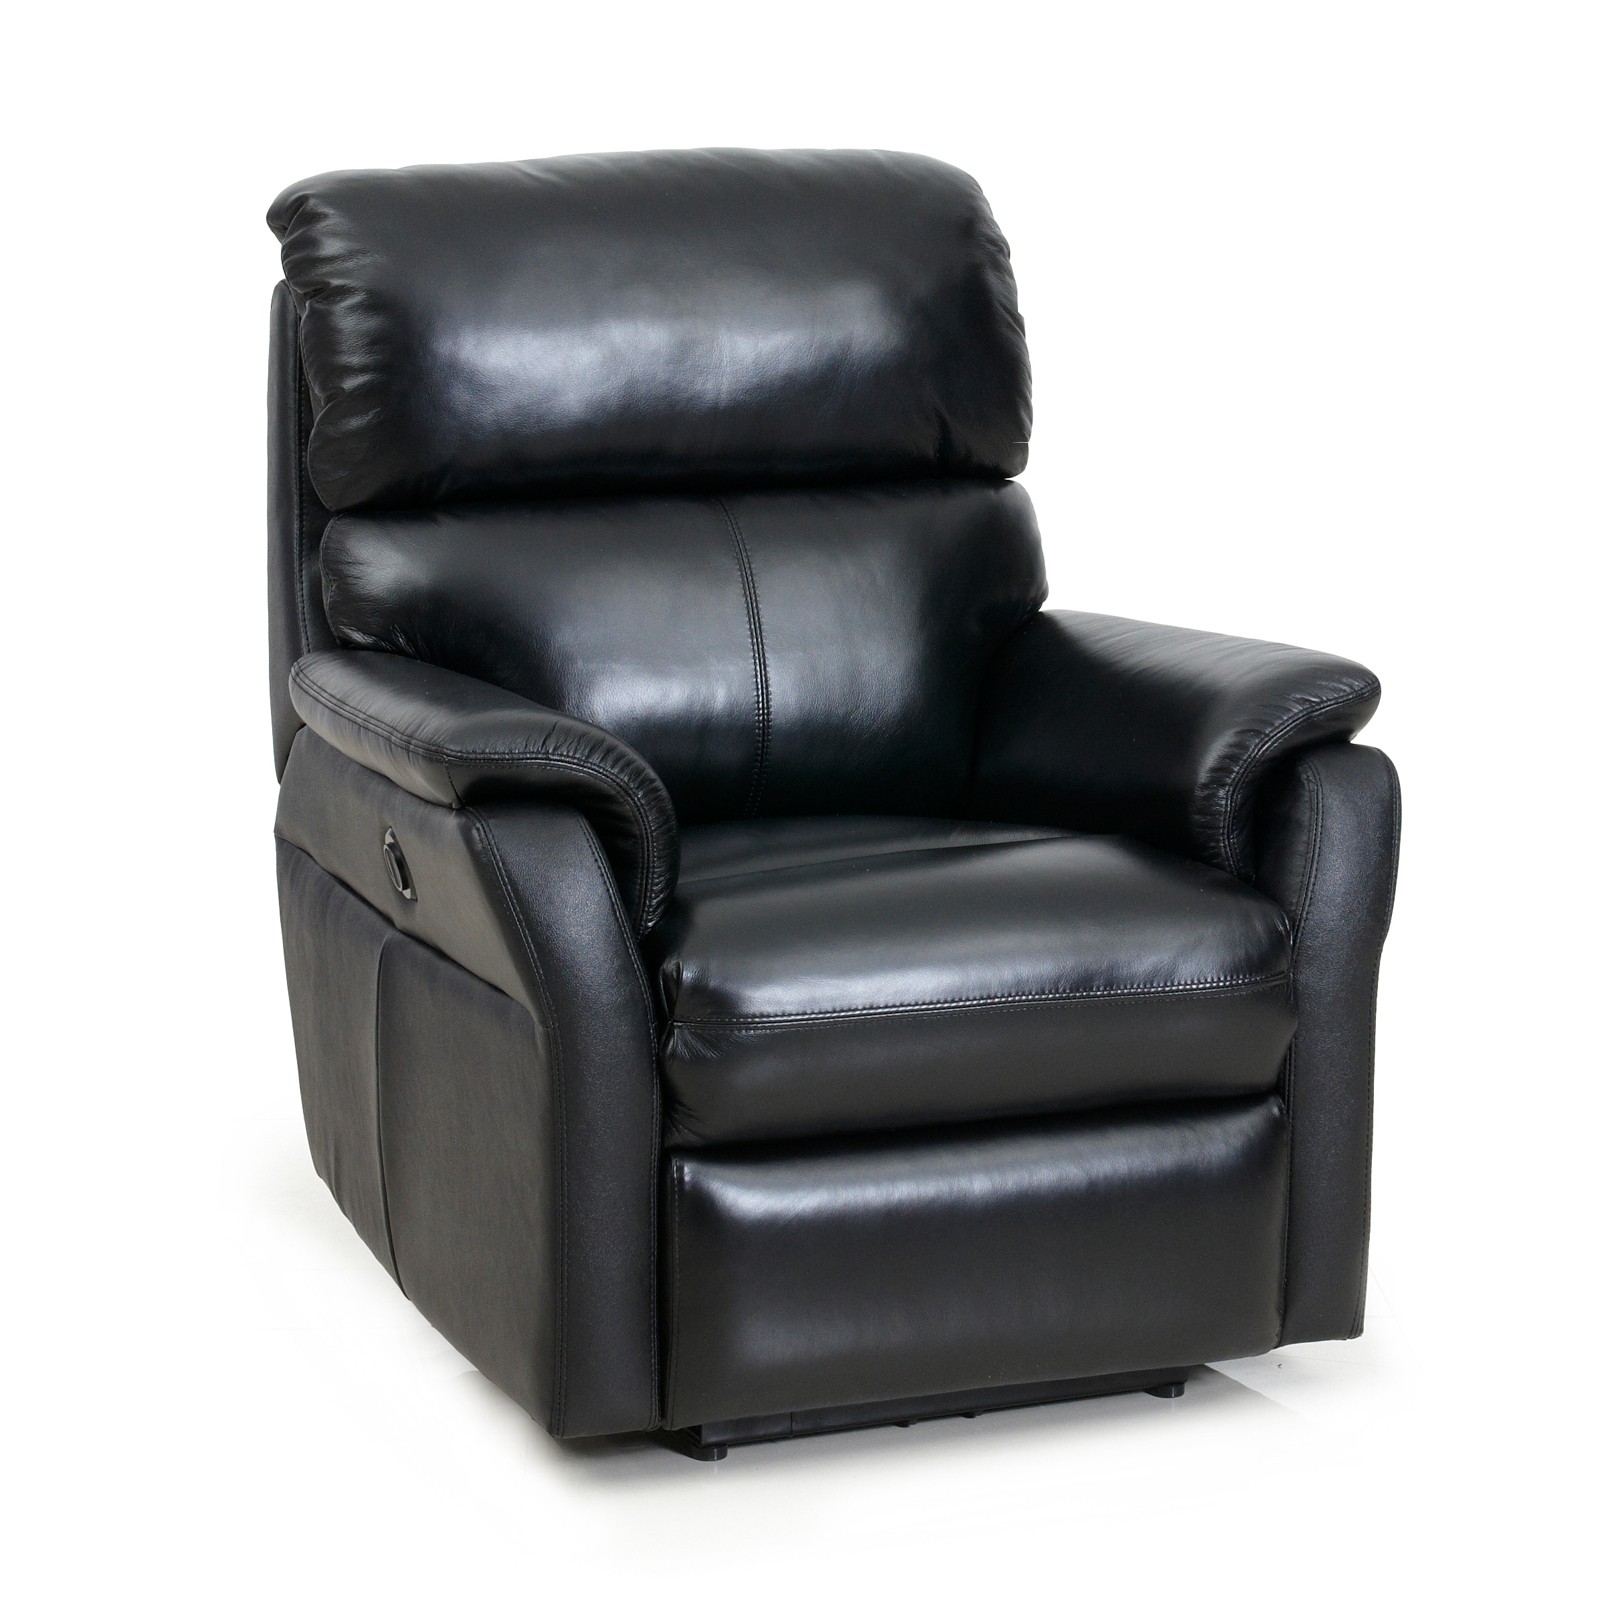 Barcalounger cross ii leather power recliner at hayneedle